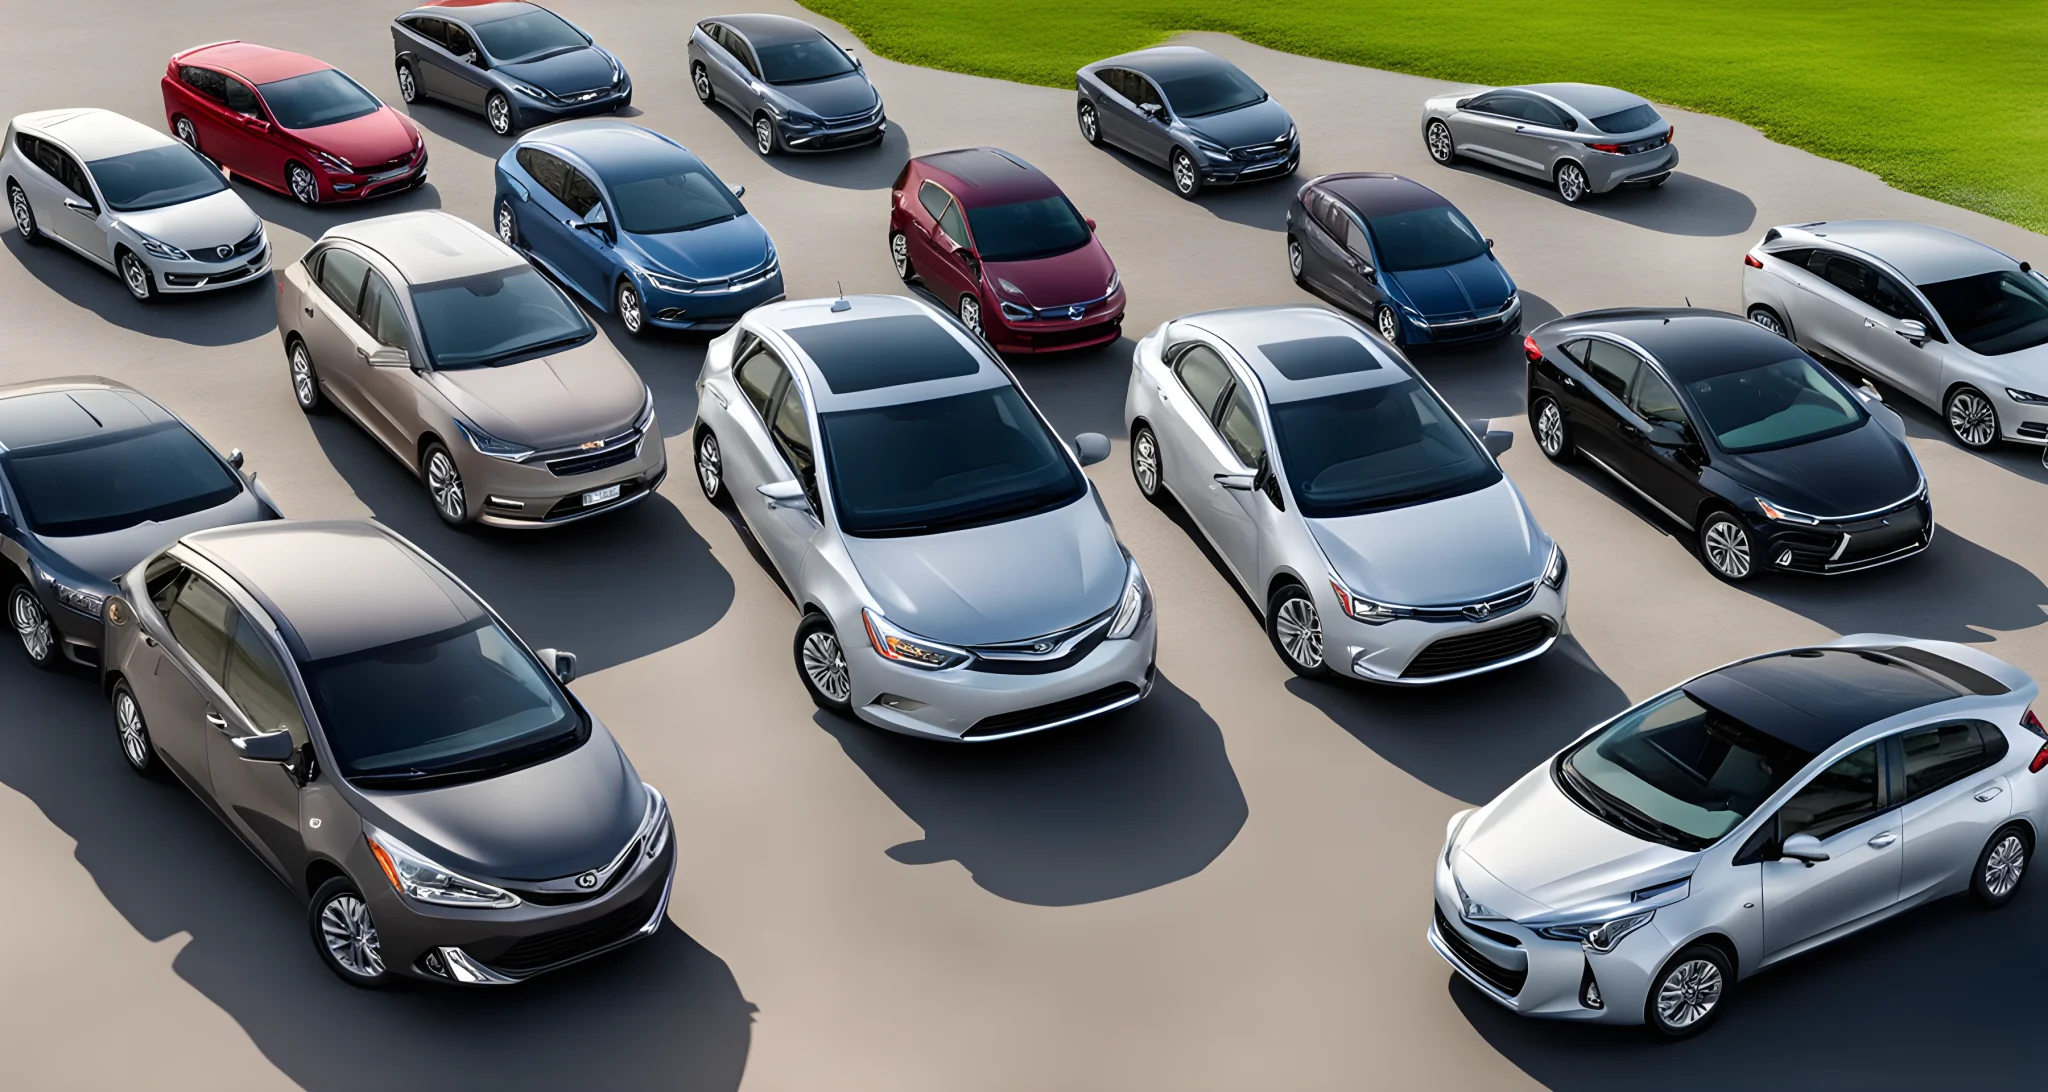 The image shows a lineup of various hybrid vehicles from different manufacturers, including sedans, SUVs, and hatchbacks.